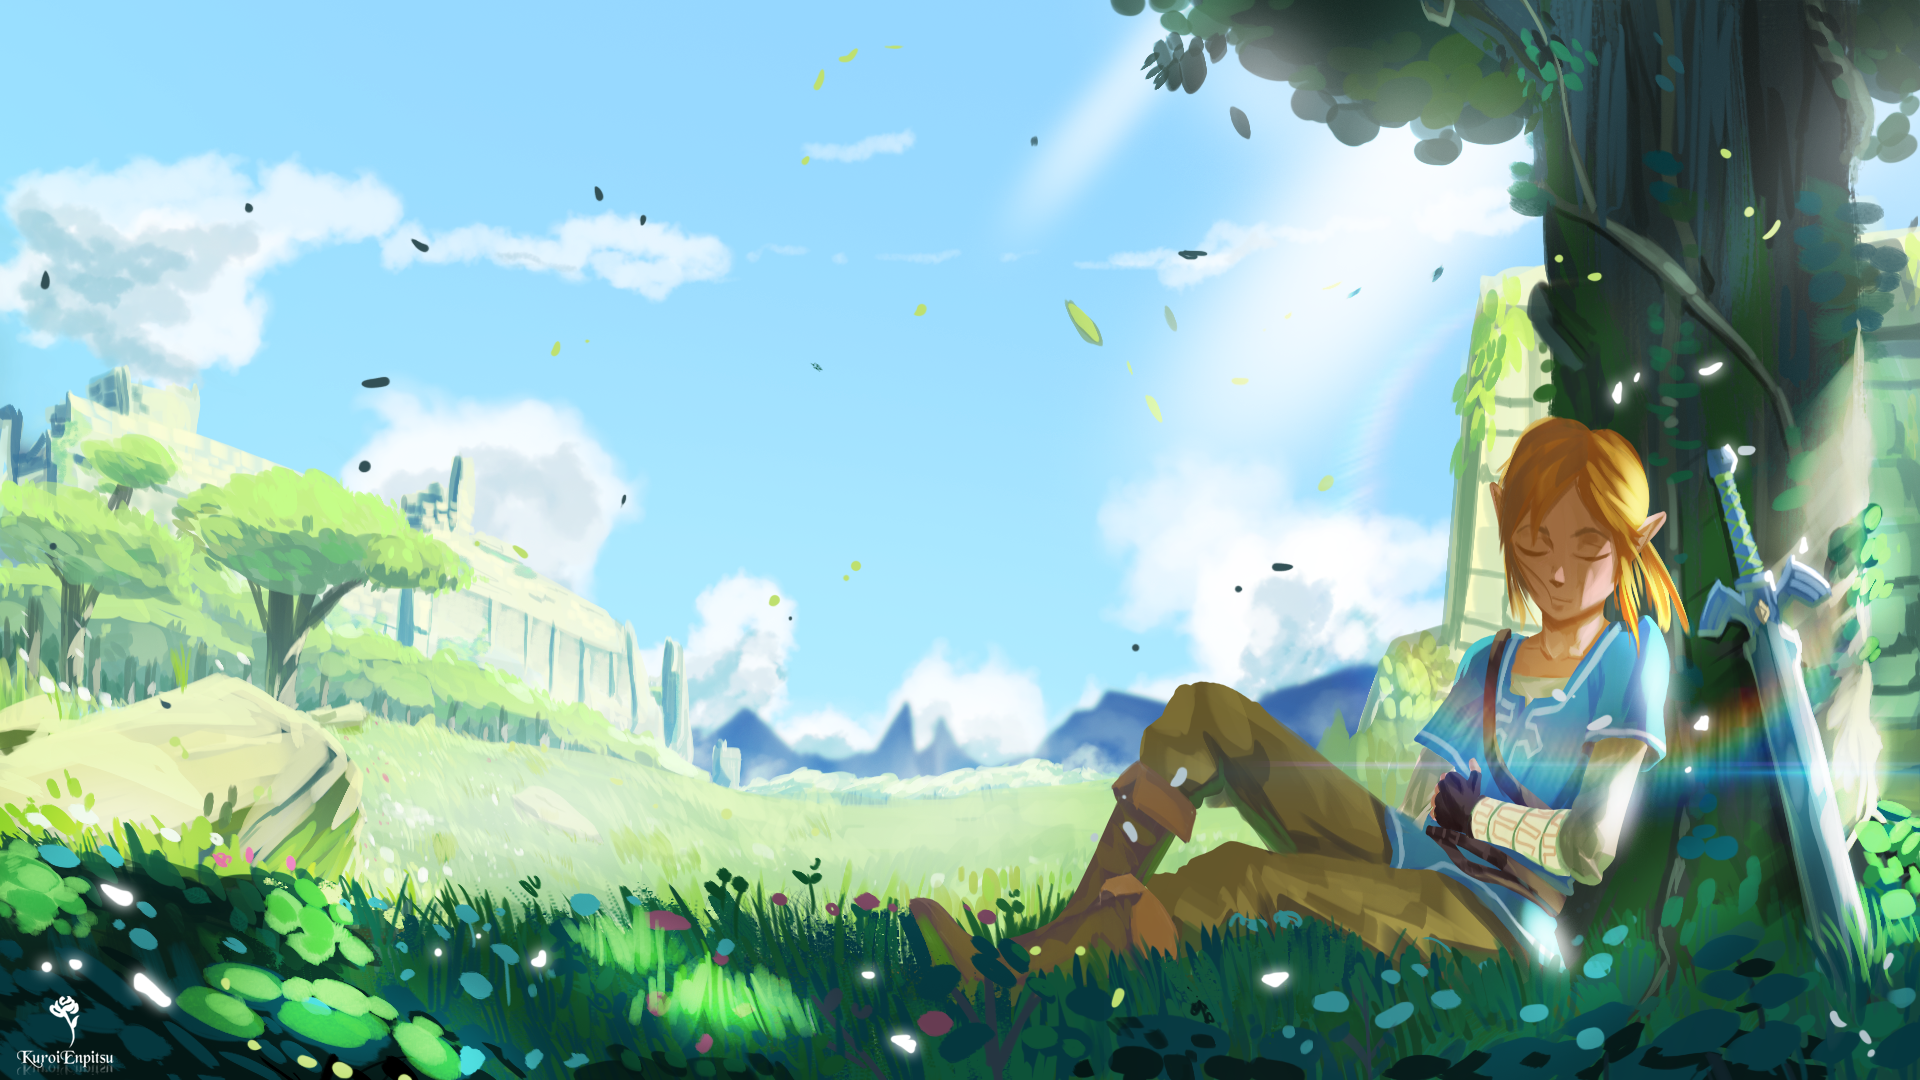 1920x1080 The Legend Of Zelda Breath Of The Wild Wallpaper Background Image View Download Comment And Breath Of The Wild Legend Of Zelda Background Image